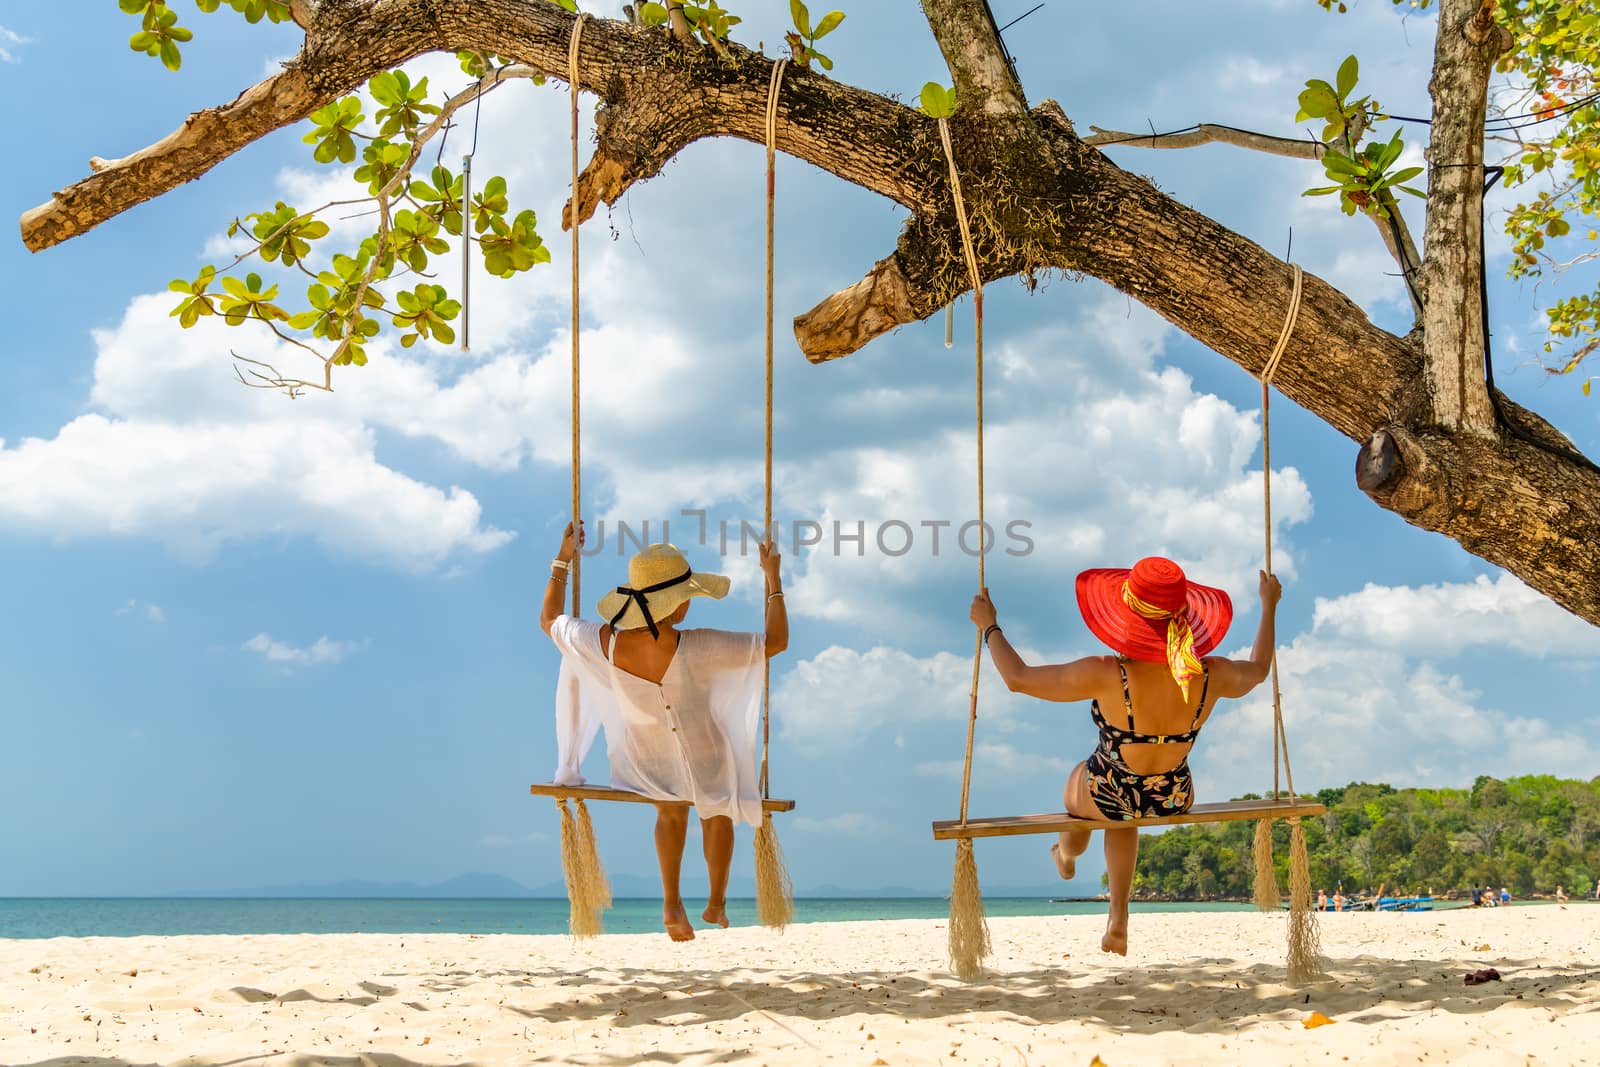 Woman at the beach in Thailand by Netfalls